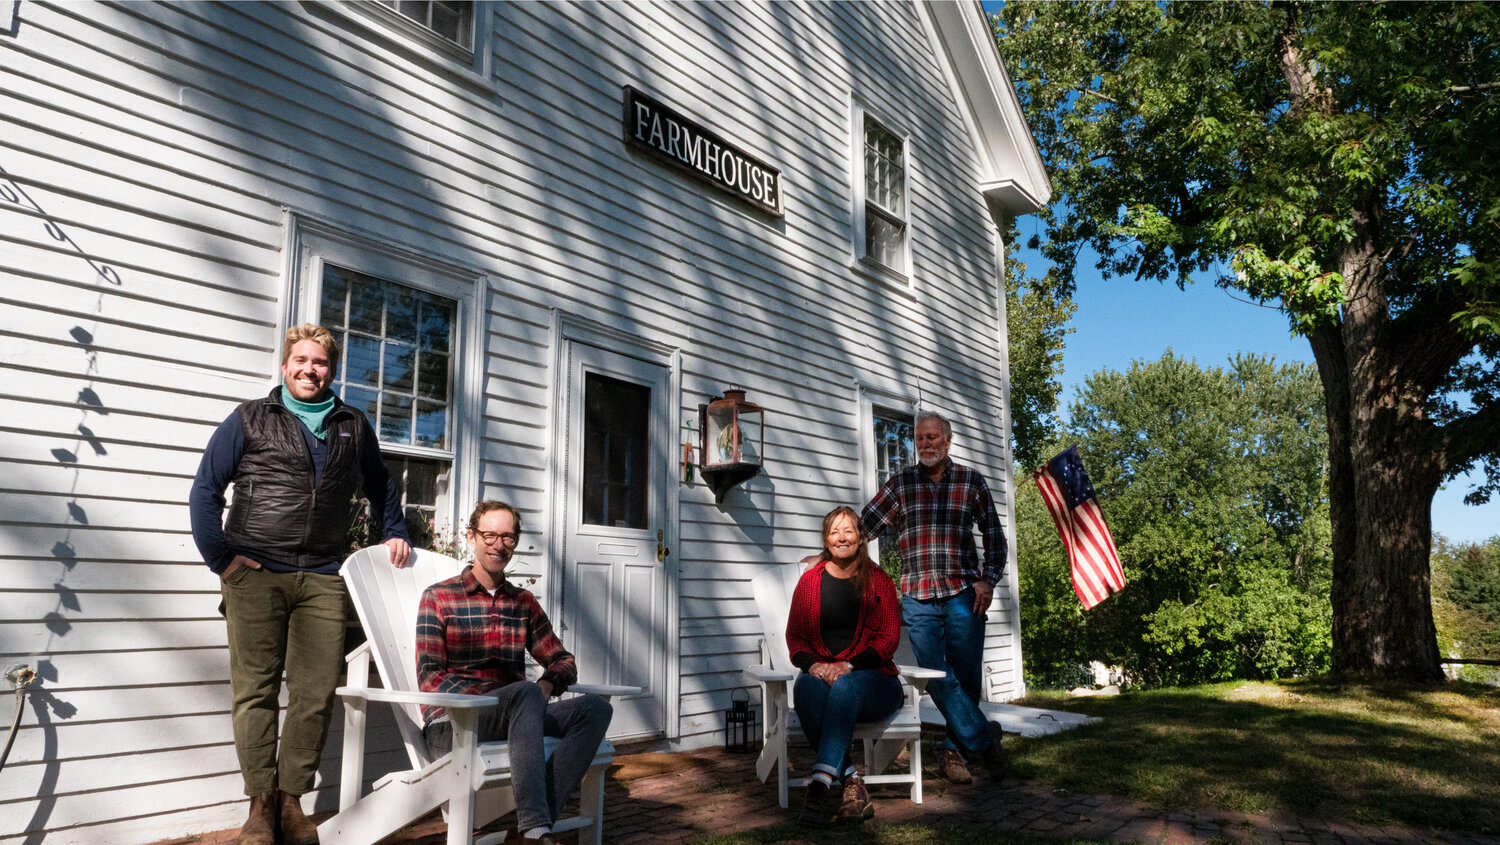 Cedar Hill Farm was in the Ginn family since 1958, and deciding to sell was a hard decision.  Luckily, they met just the right buyers.  From left, Justin O’Keefe Kane, Drew Godfrey, Jayne Ginn and Michael Ginn.